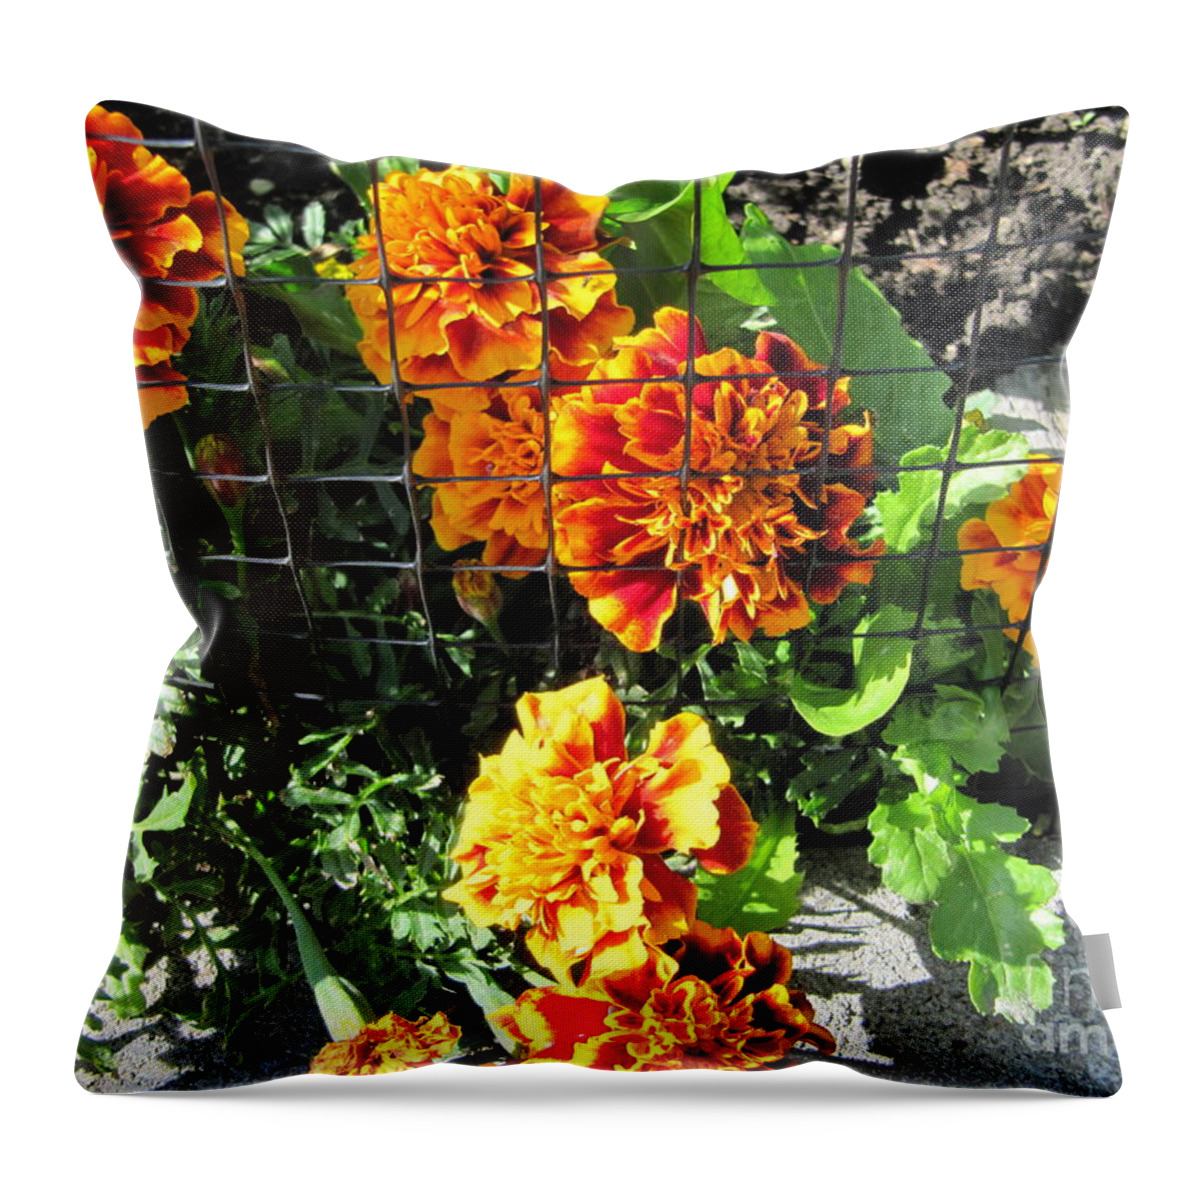 Portrait Throw Pillow featuring the photograph Marigolds in Prison by Donna L Munro